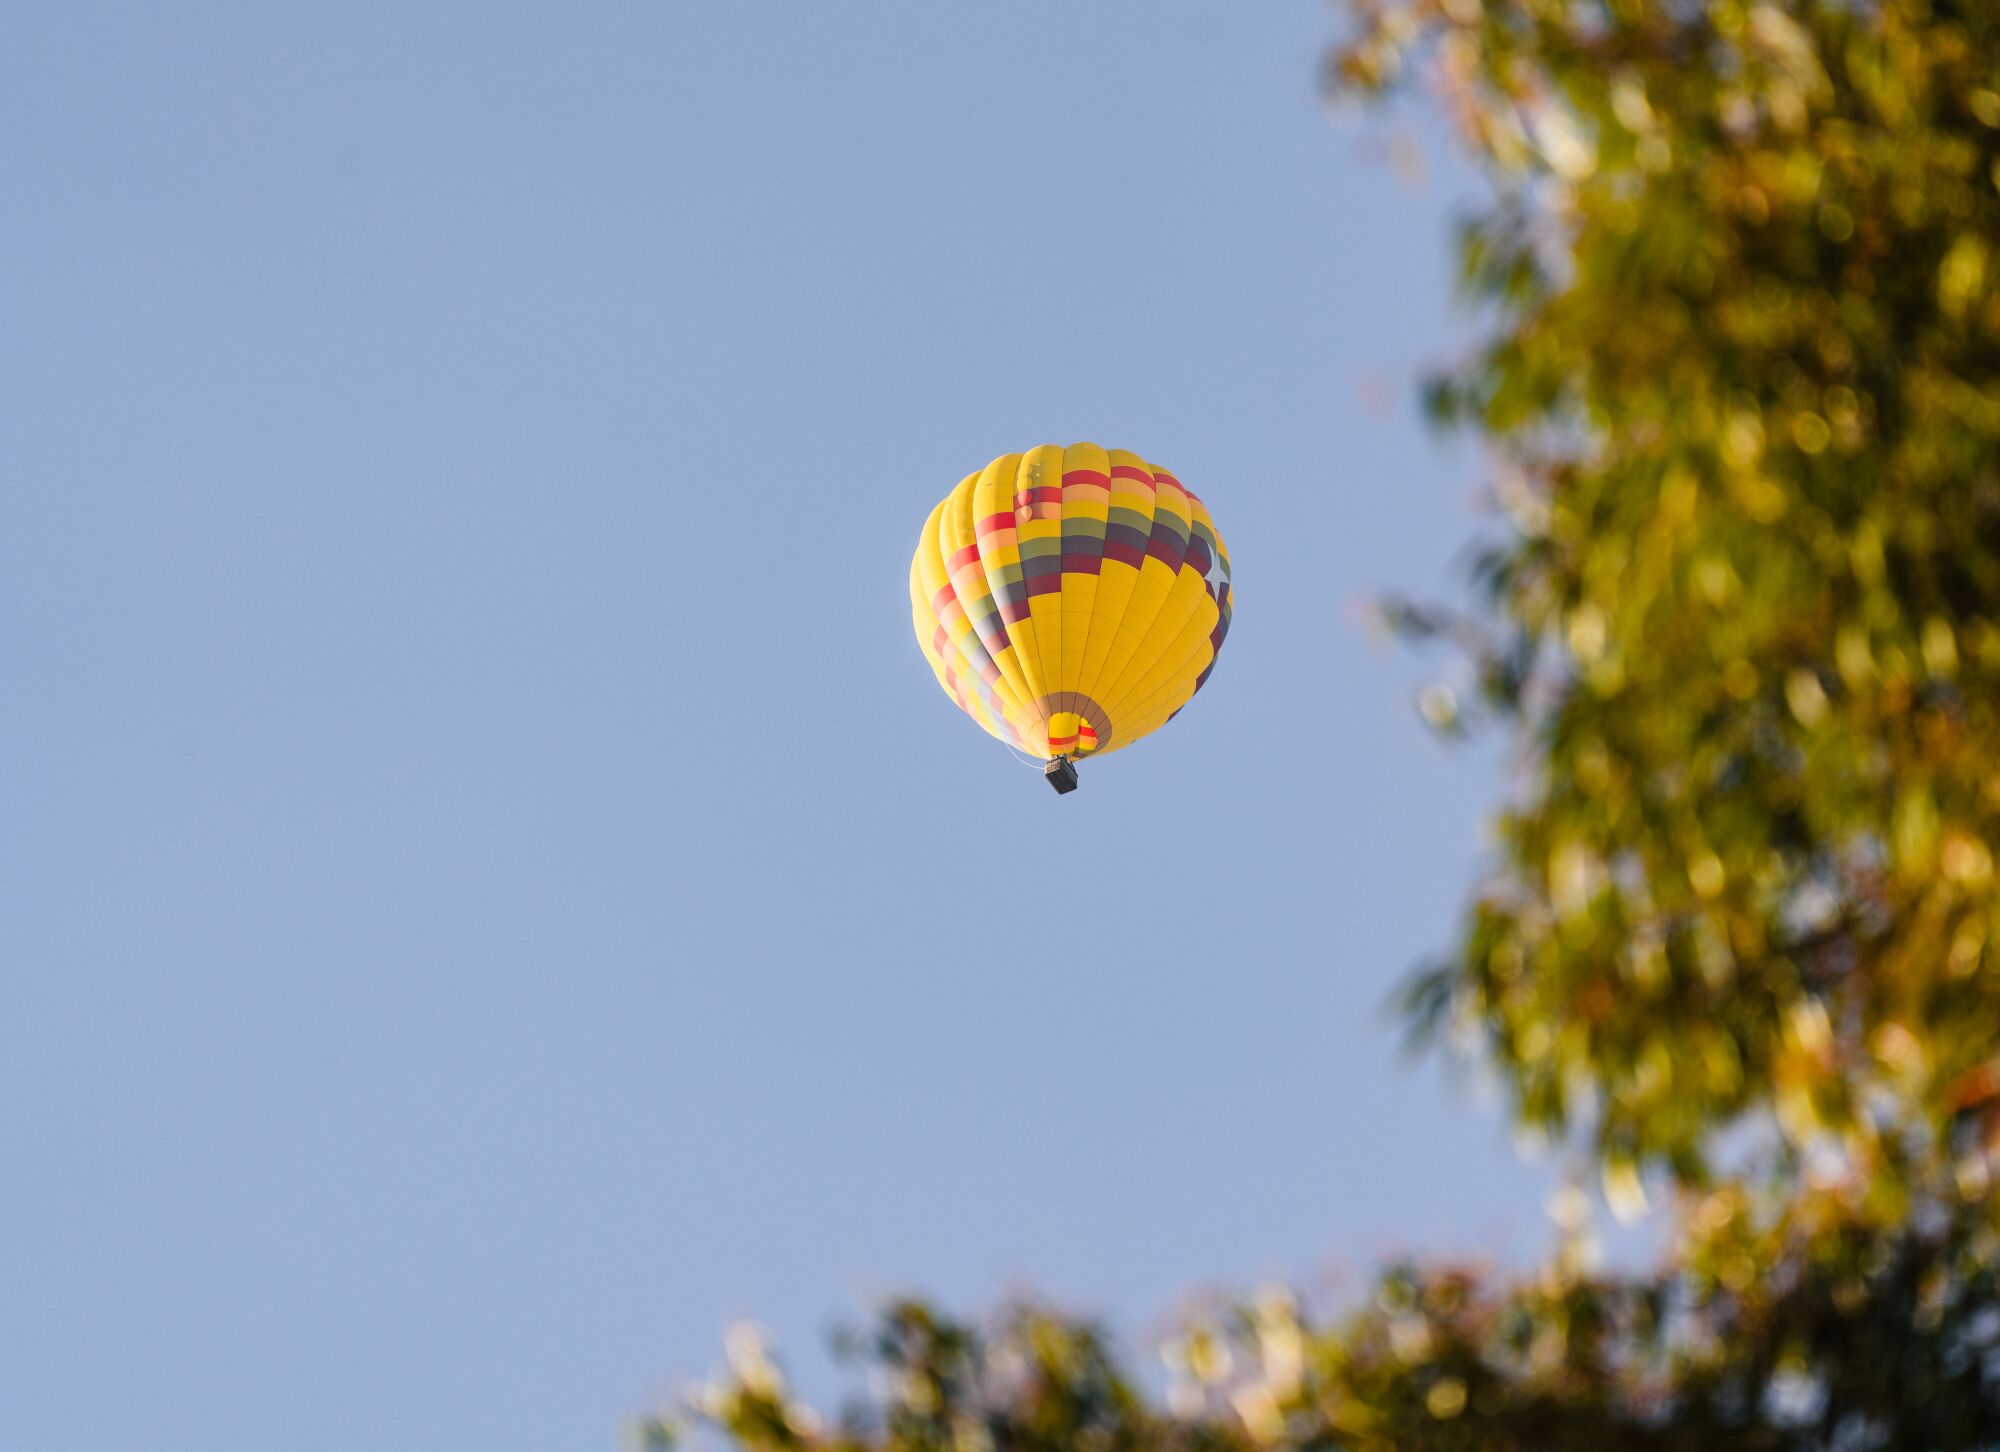 Diners at The Pony Room in Rancho Santa Fe can watch hot-air balloons drift overhead 